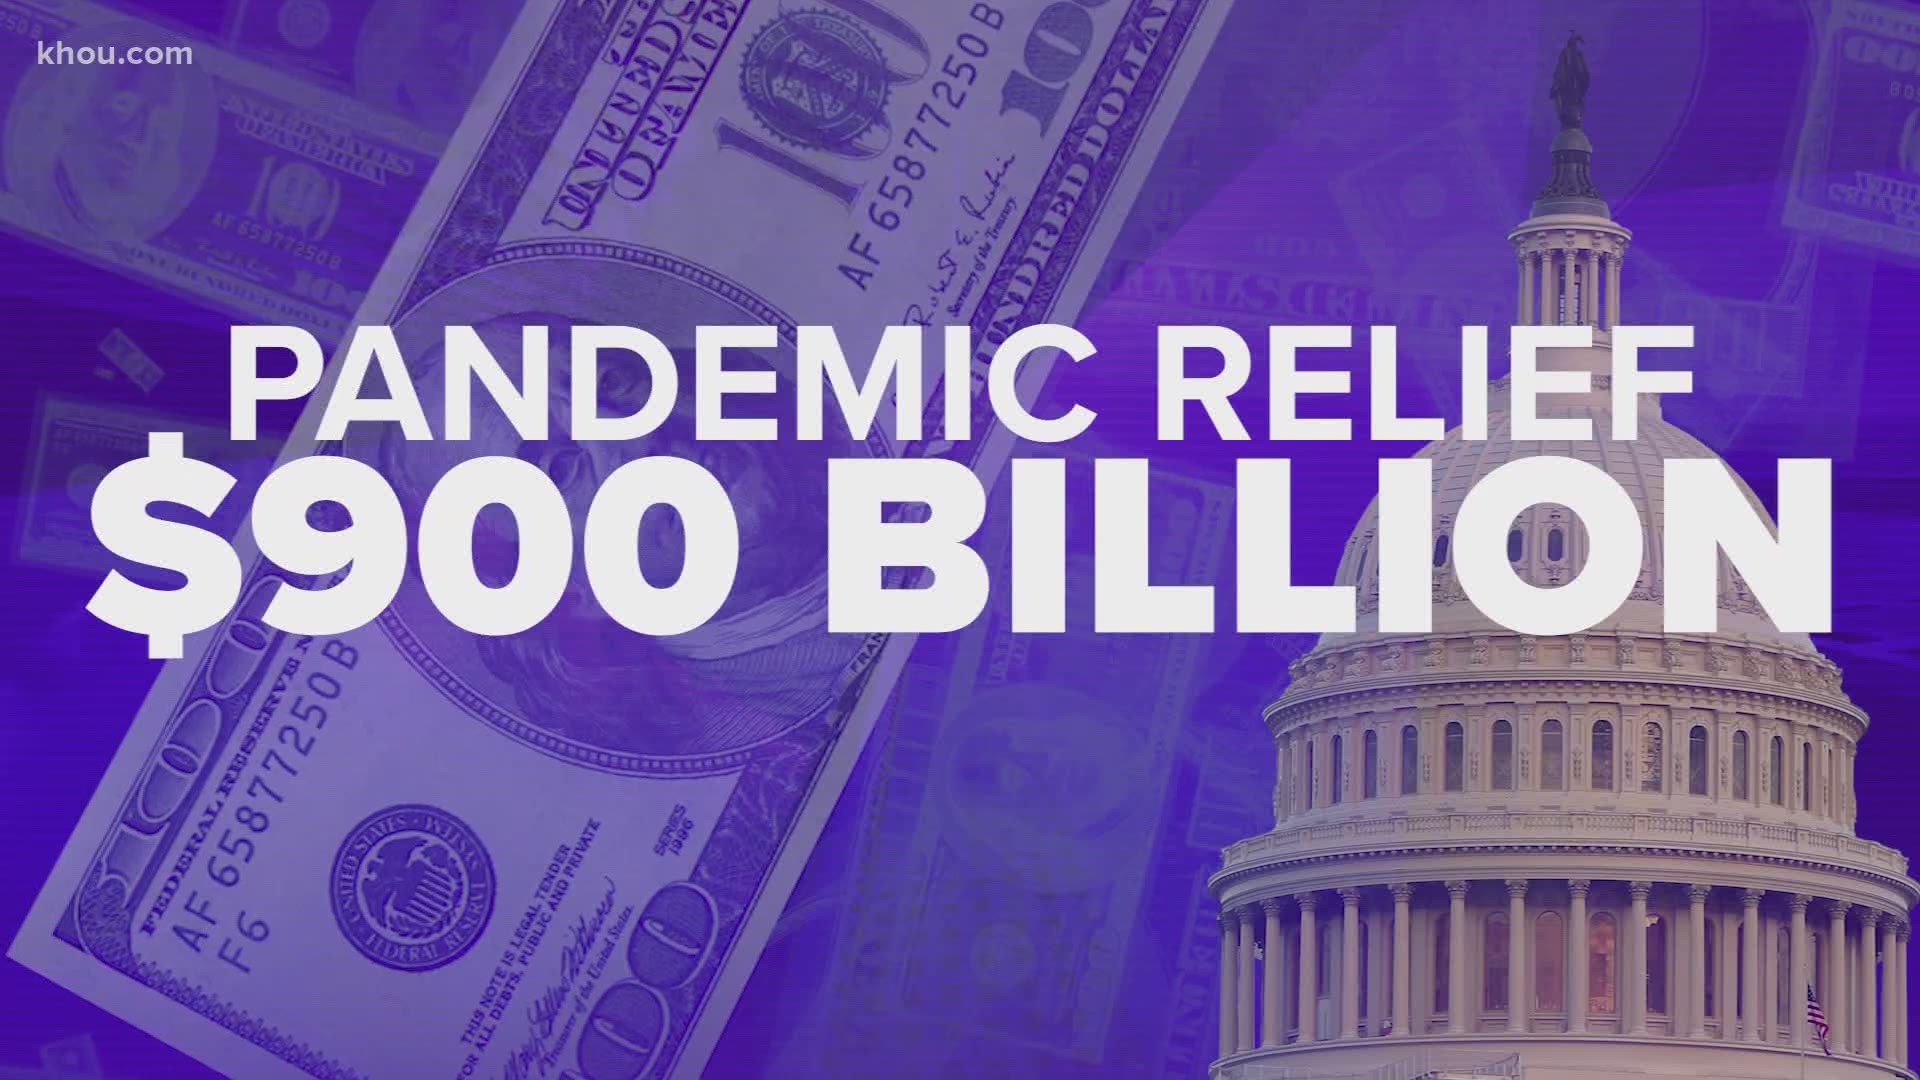 After months of Washington gridlock, Congress is set to vote on a $900 billion pandemic relief package.